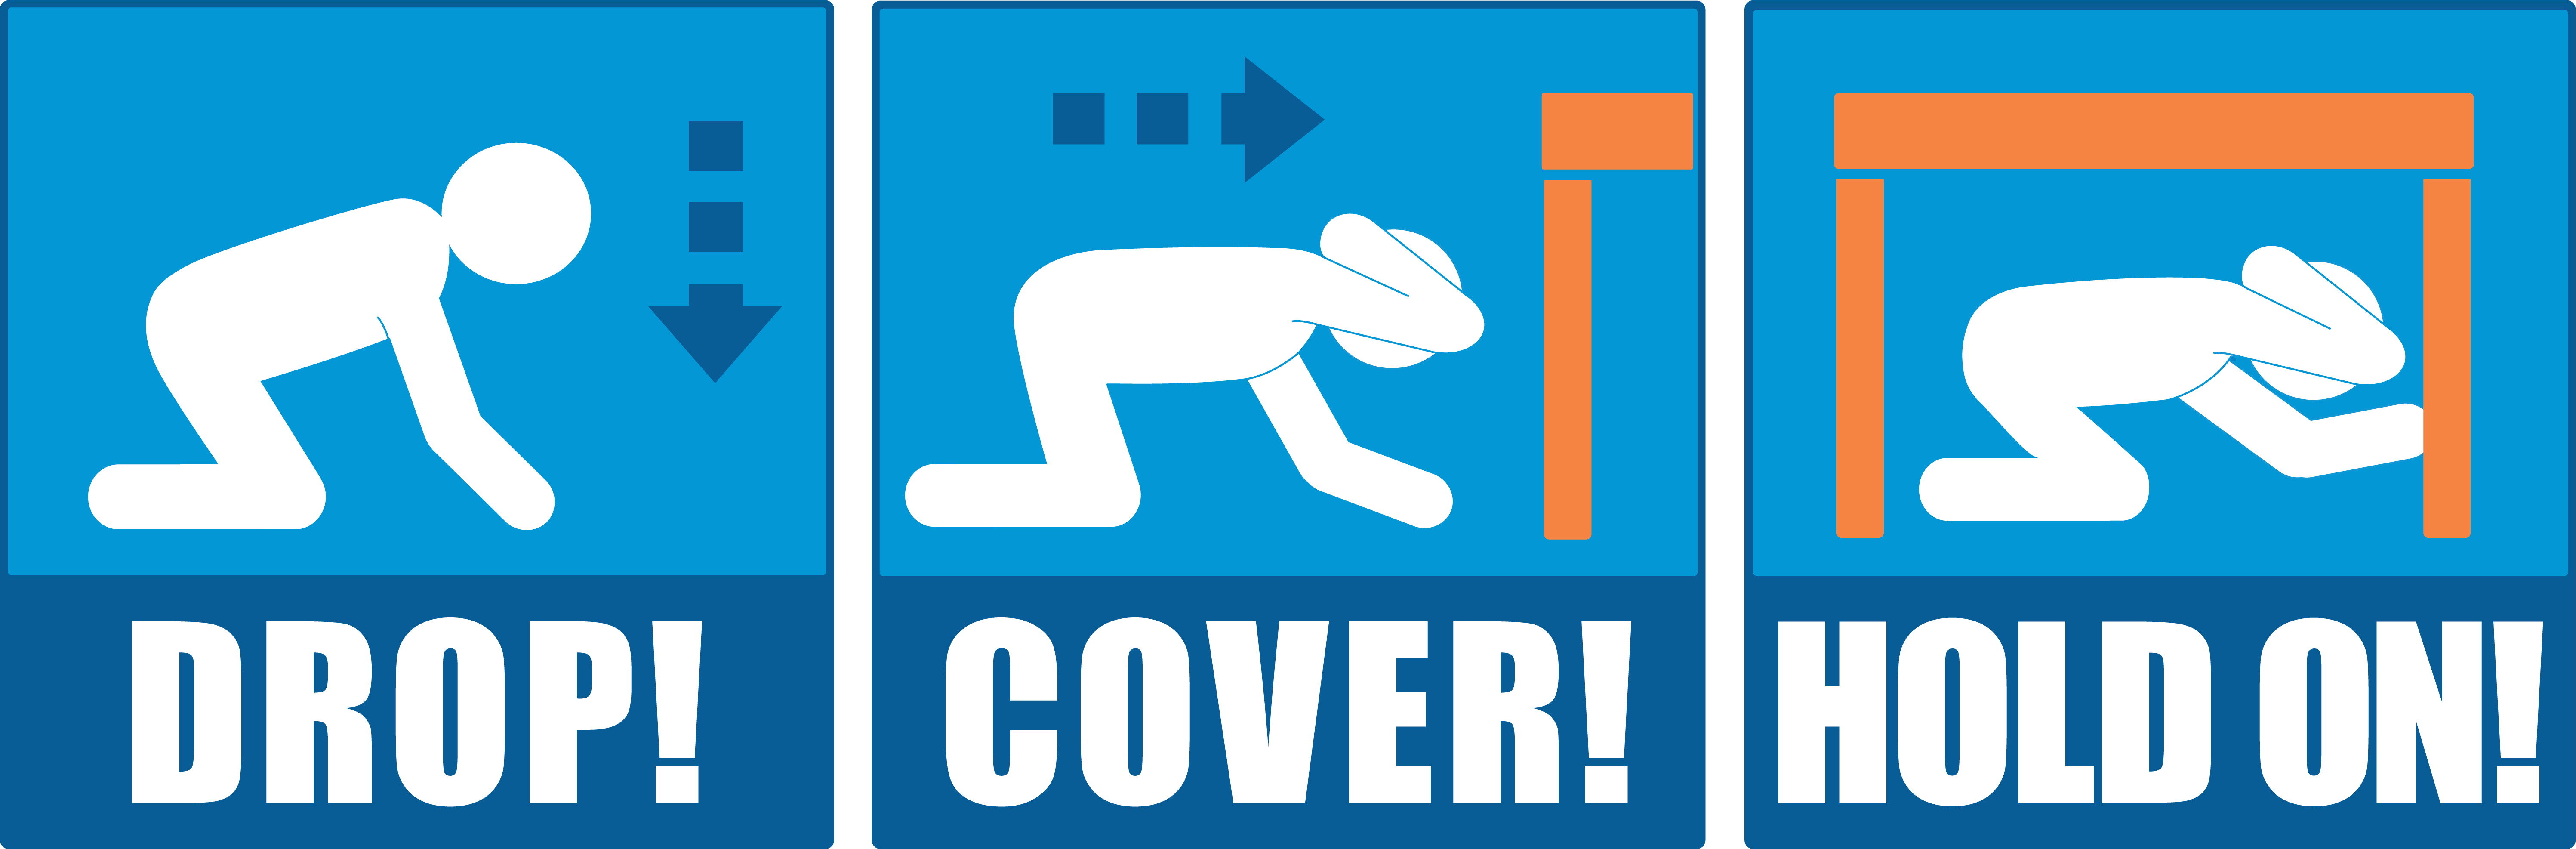 Drop, Cover, Hold on graphic, courtesy of ShakeOutBC 